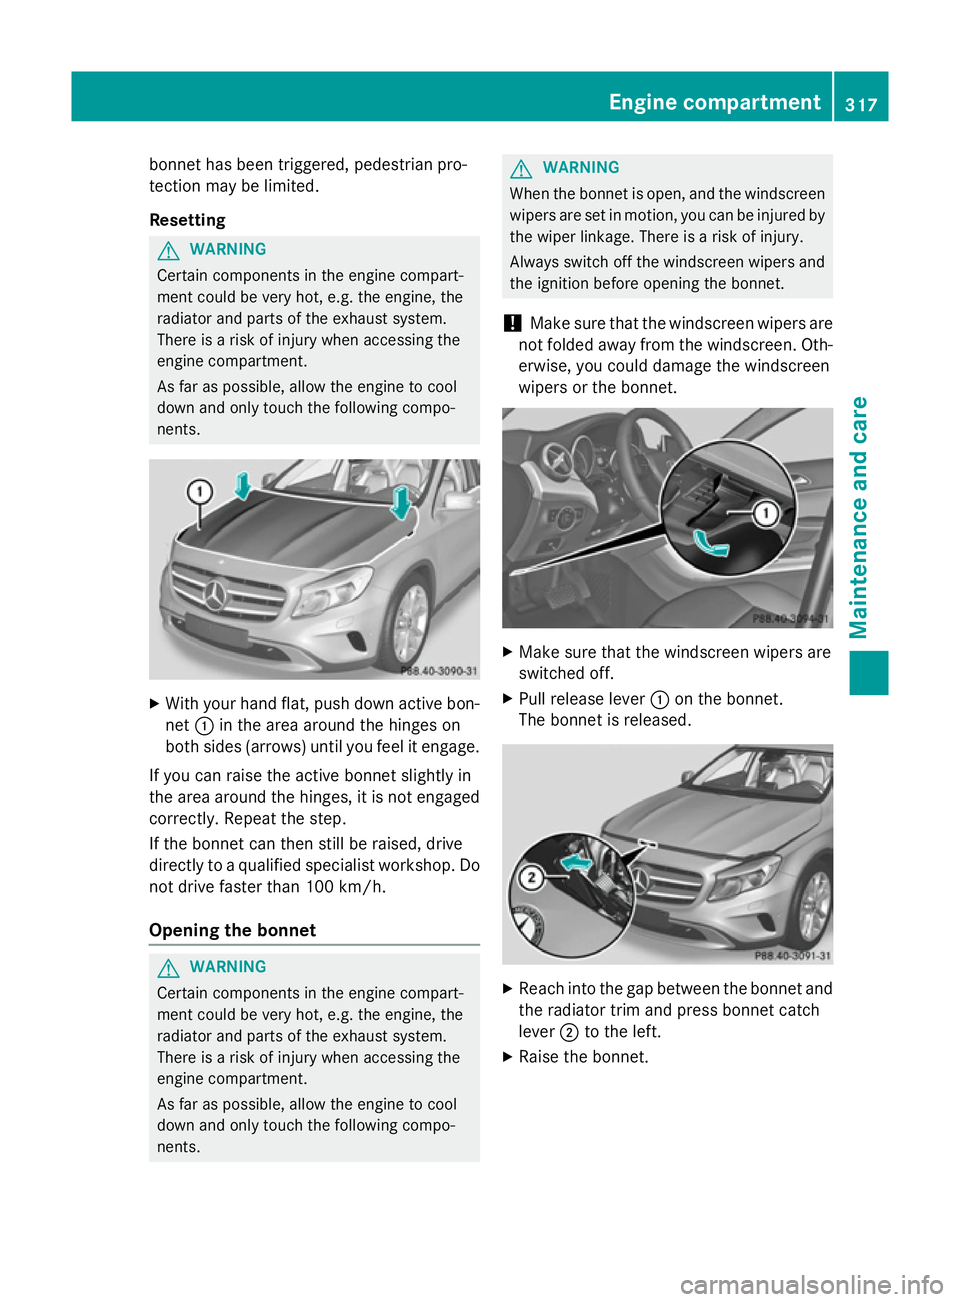 MERCEDES-BENZ GLA SUV 2013  Owners Manual bonnet has been triggered, pedestrian pro-
tection may be limited.
Resetting G
WARNING
Certain components in the engine compart-
ment could be very hot, e.g. the engine, the
radiator and parts of the 